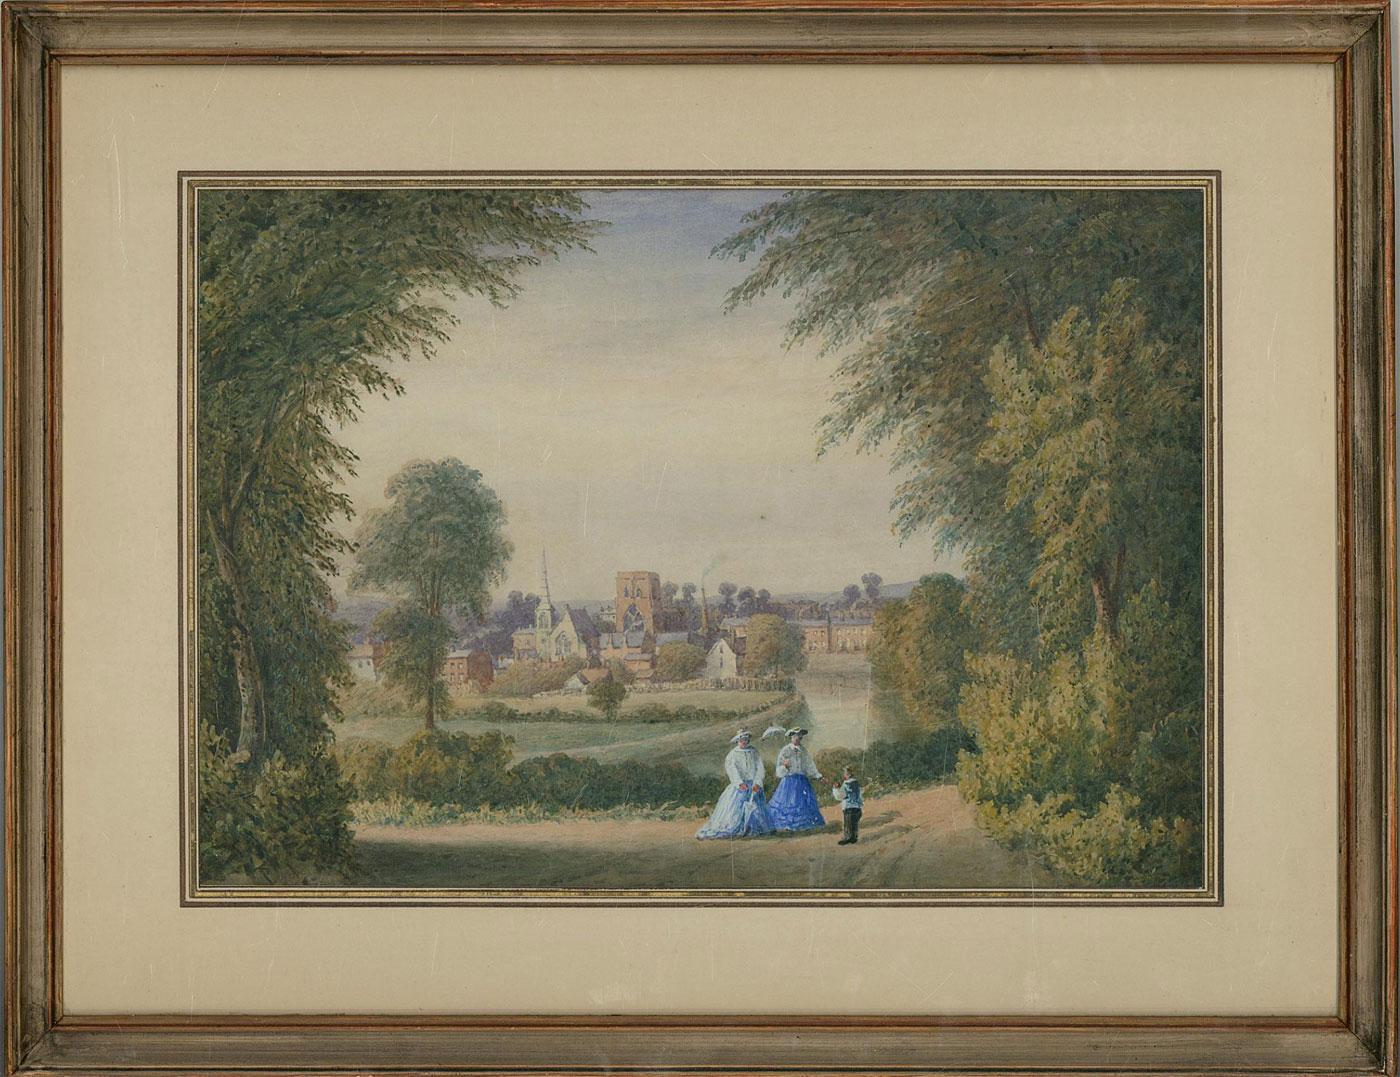 A charming and captivating watercolour painting with gouache details, depicting a landscape scene with figures strolling through a path with trees and a town in the distance. Well-presented in a washline card mount and in a distressed wooden frame.